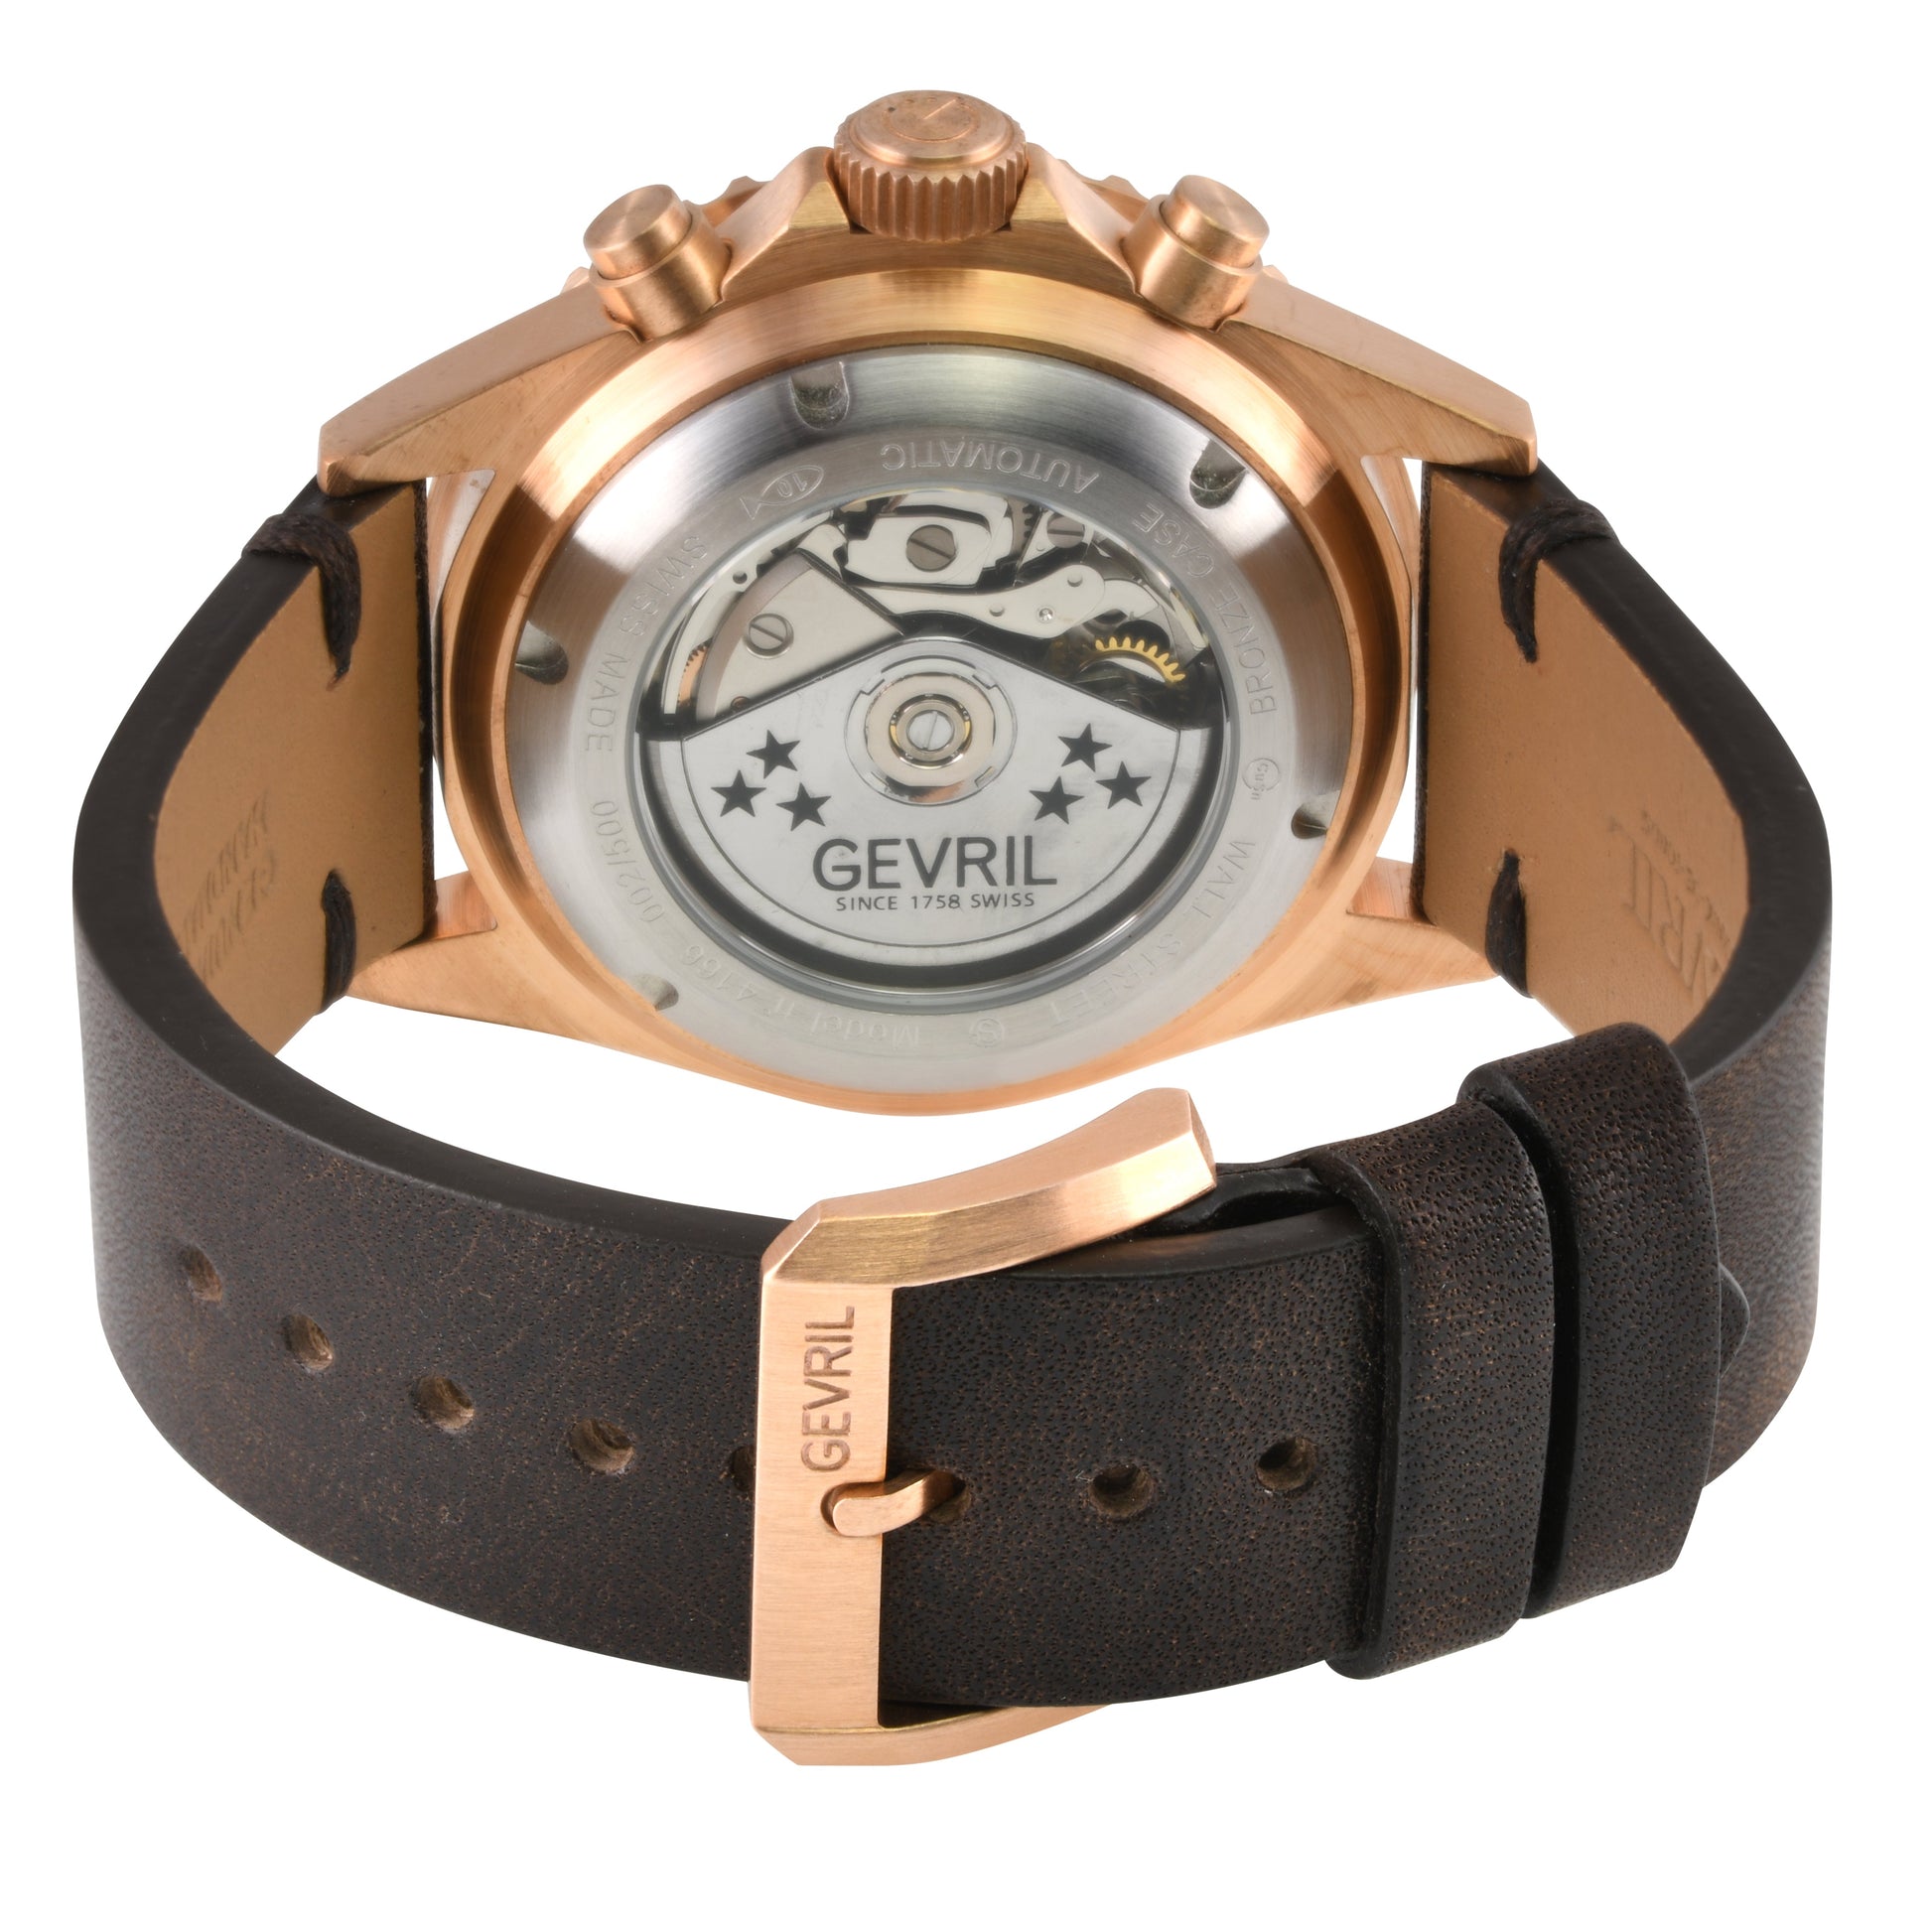 Gevril-Luxury-Swiss-Watches-Gevril Wall Street Bronze- Chronograph-4166